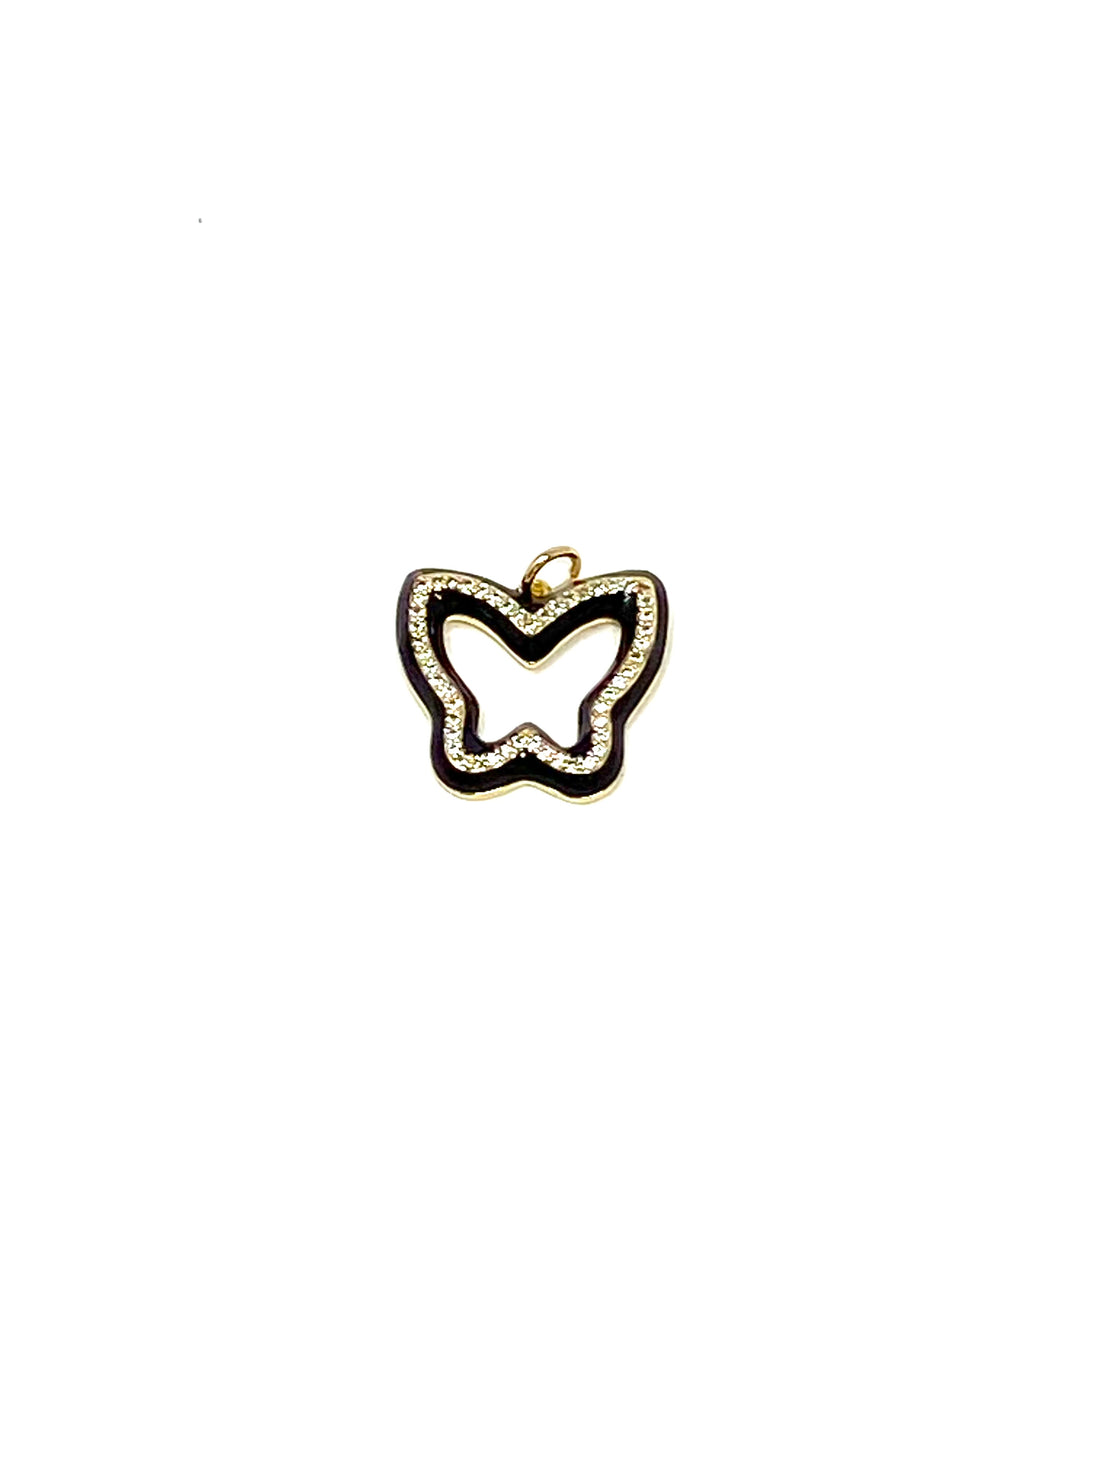 Charming Enamel Butterfly Charm with Gold Pave Outline